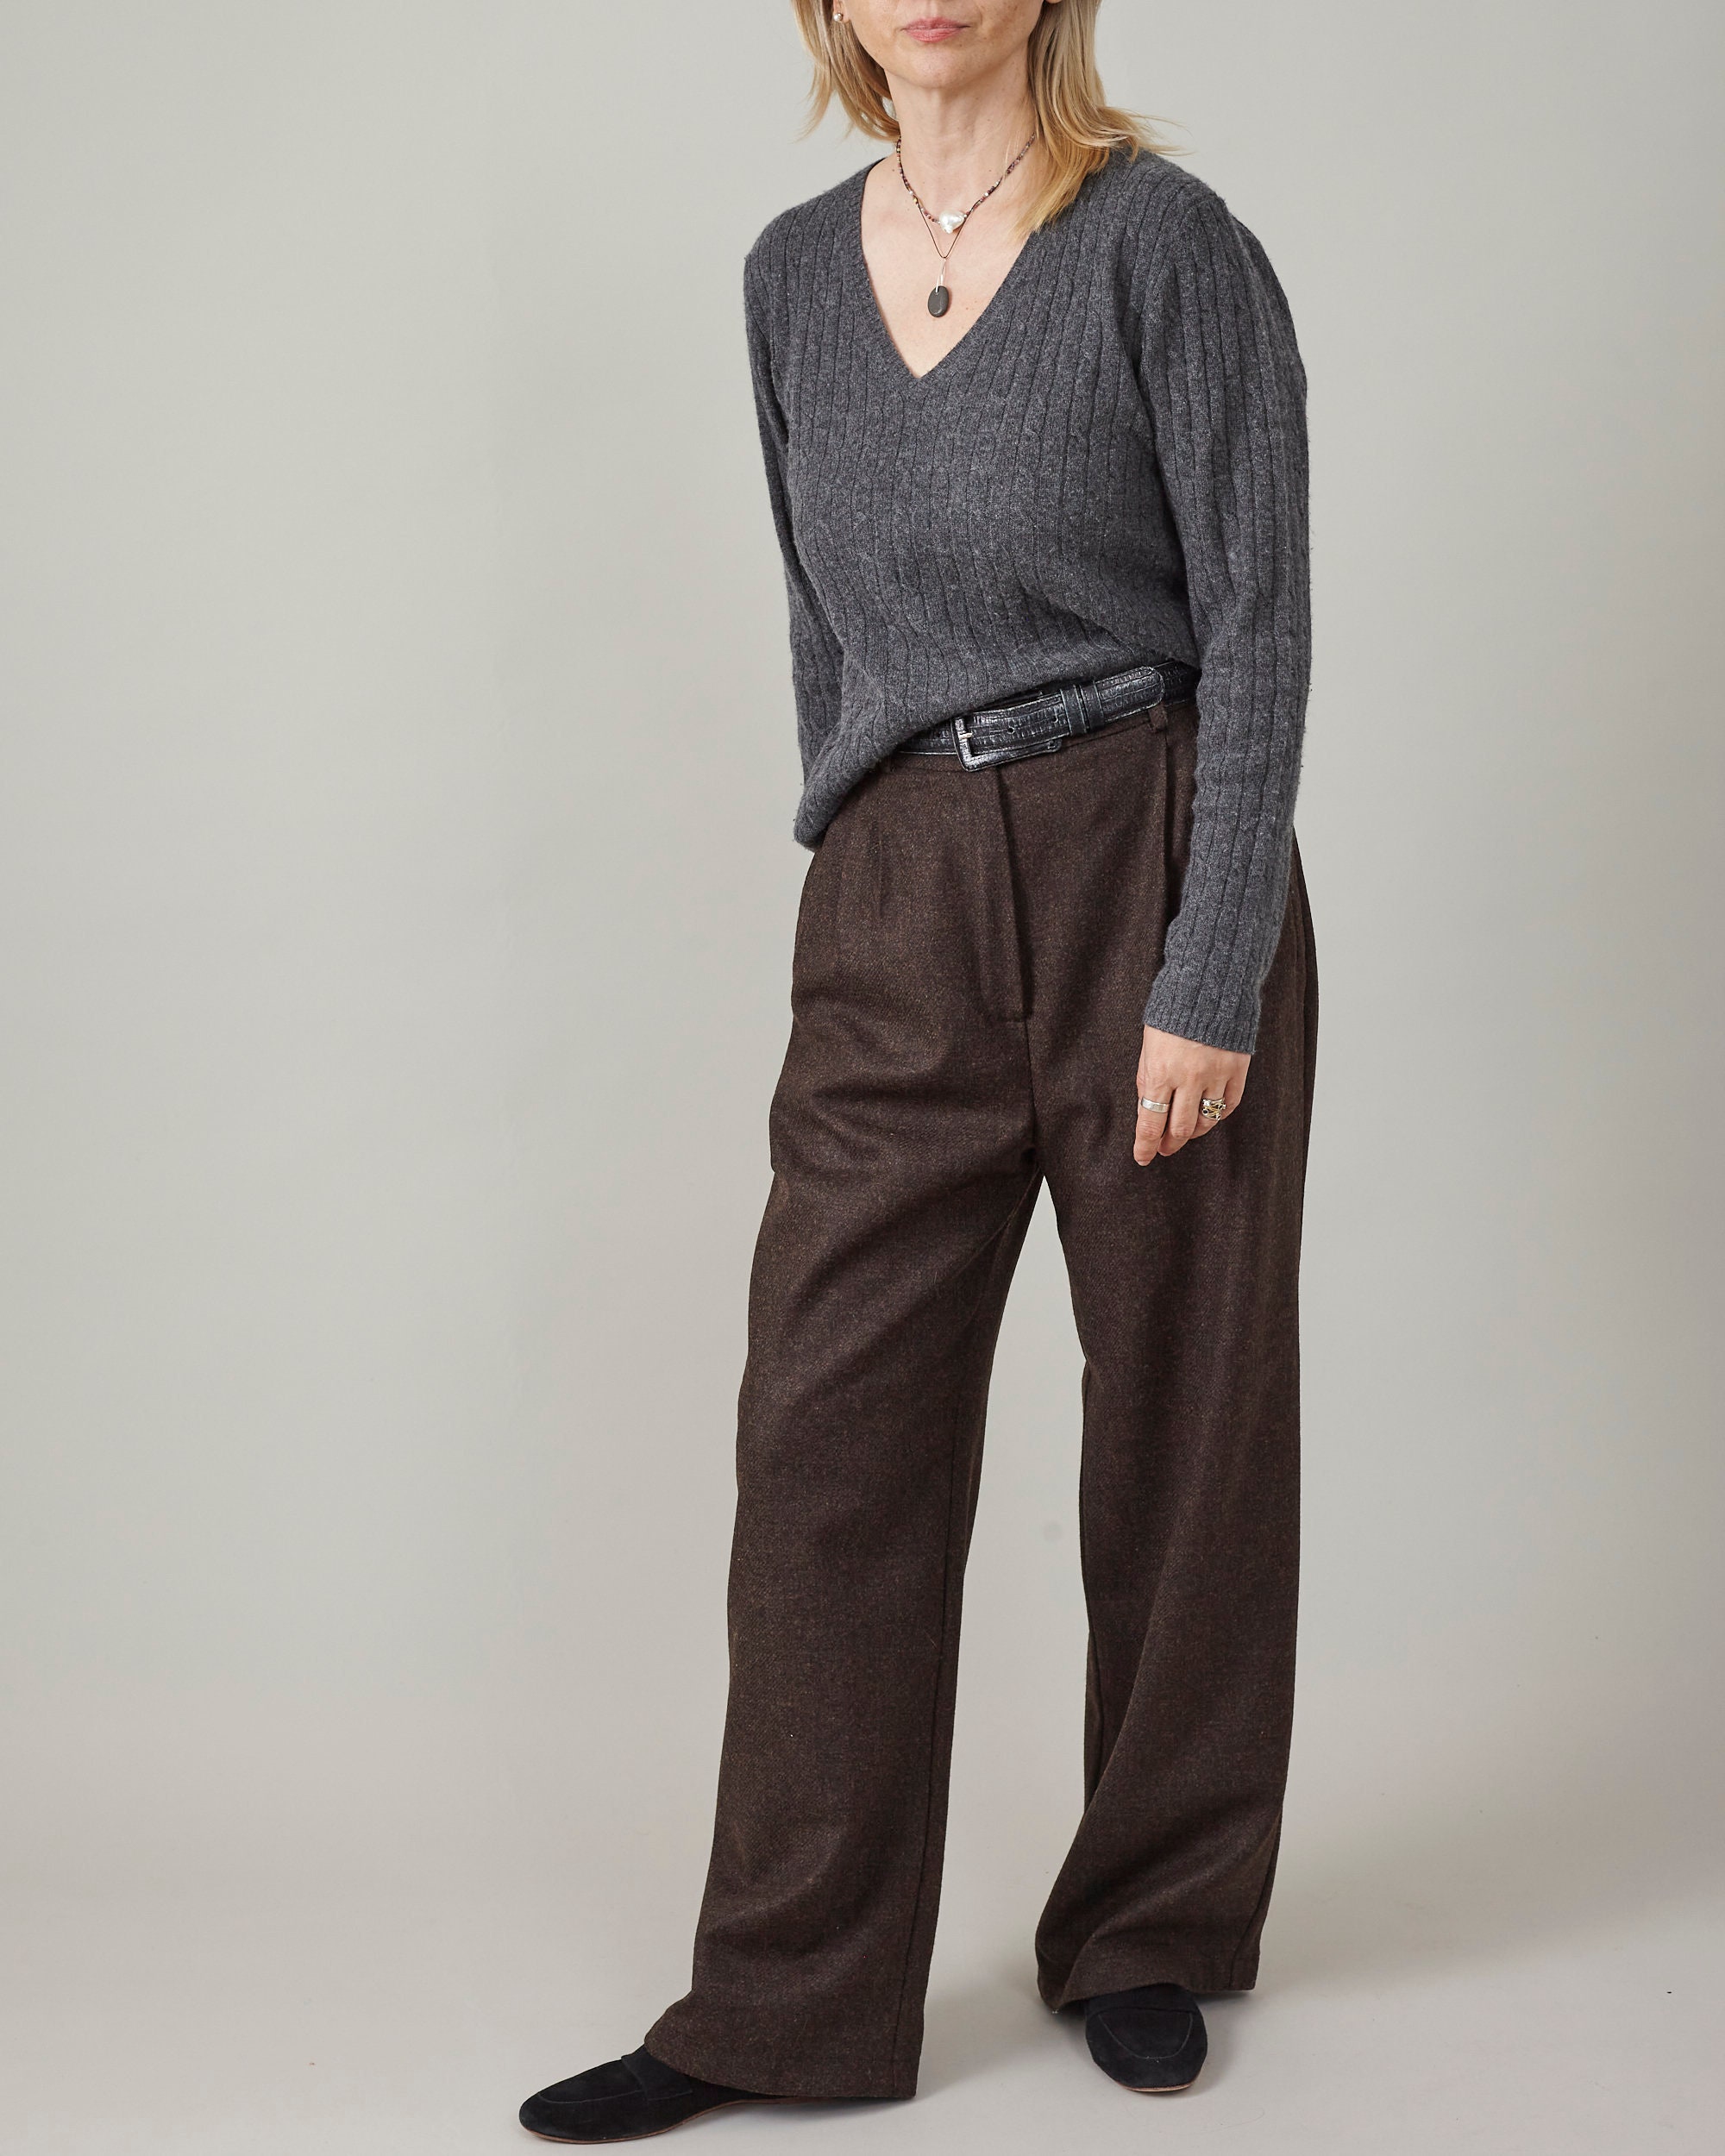 Buy Women's Brown Wool Dress Pants Wide Leg Tailored Trousers for Winter  With Pleats and Cuffed Hem Online in India 